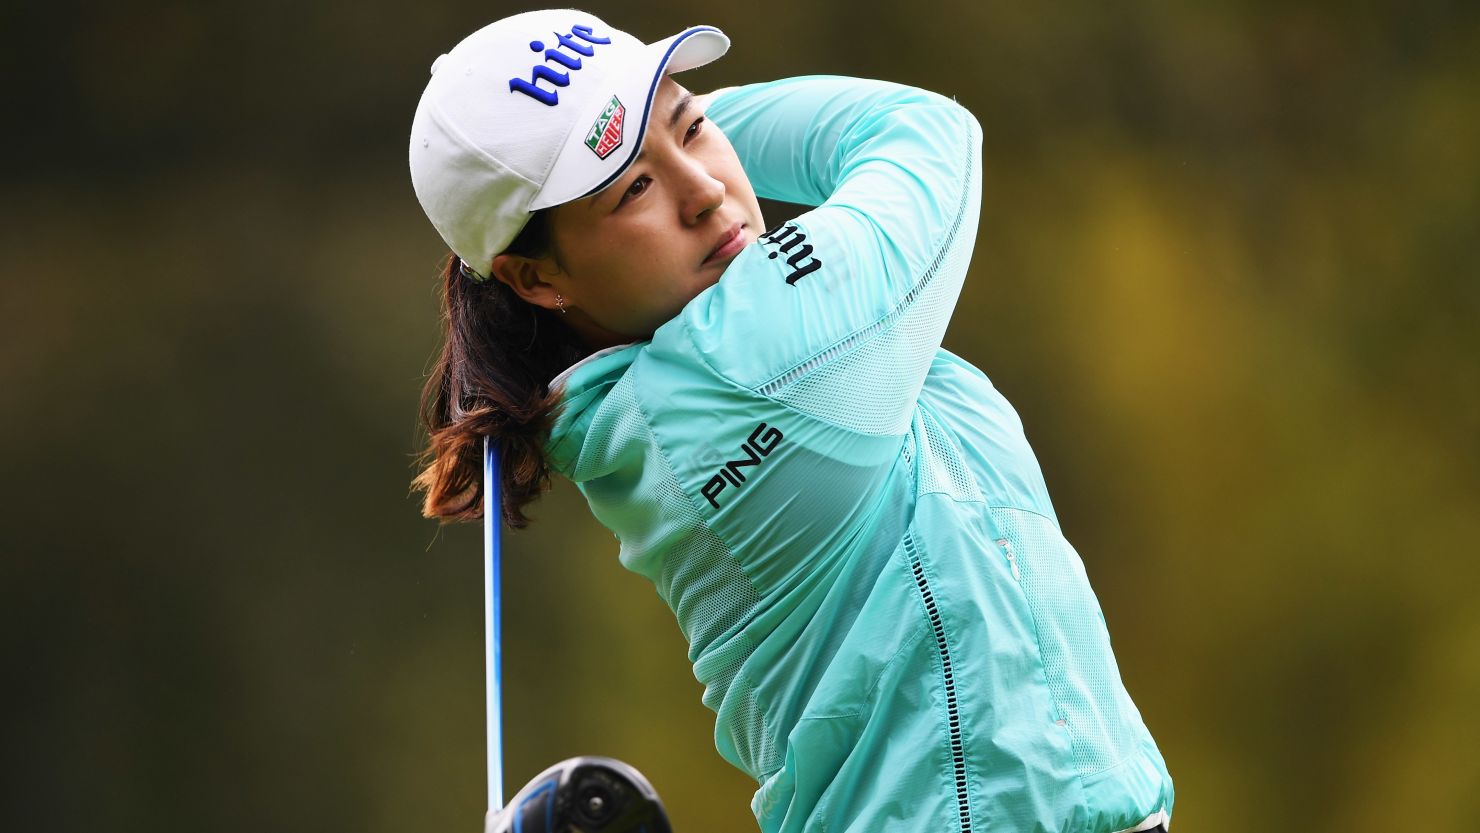 In-Gee Chun was joint leader at the Evian Championship after Thursday's opening round.